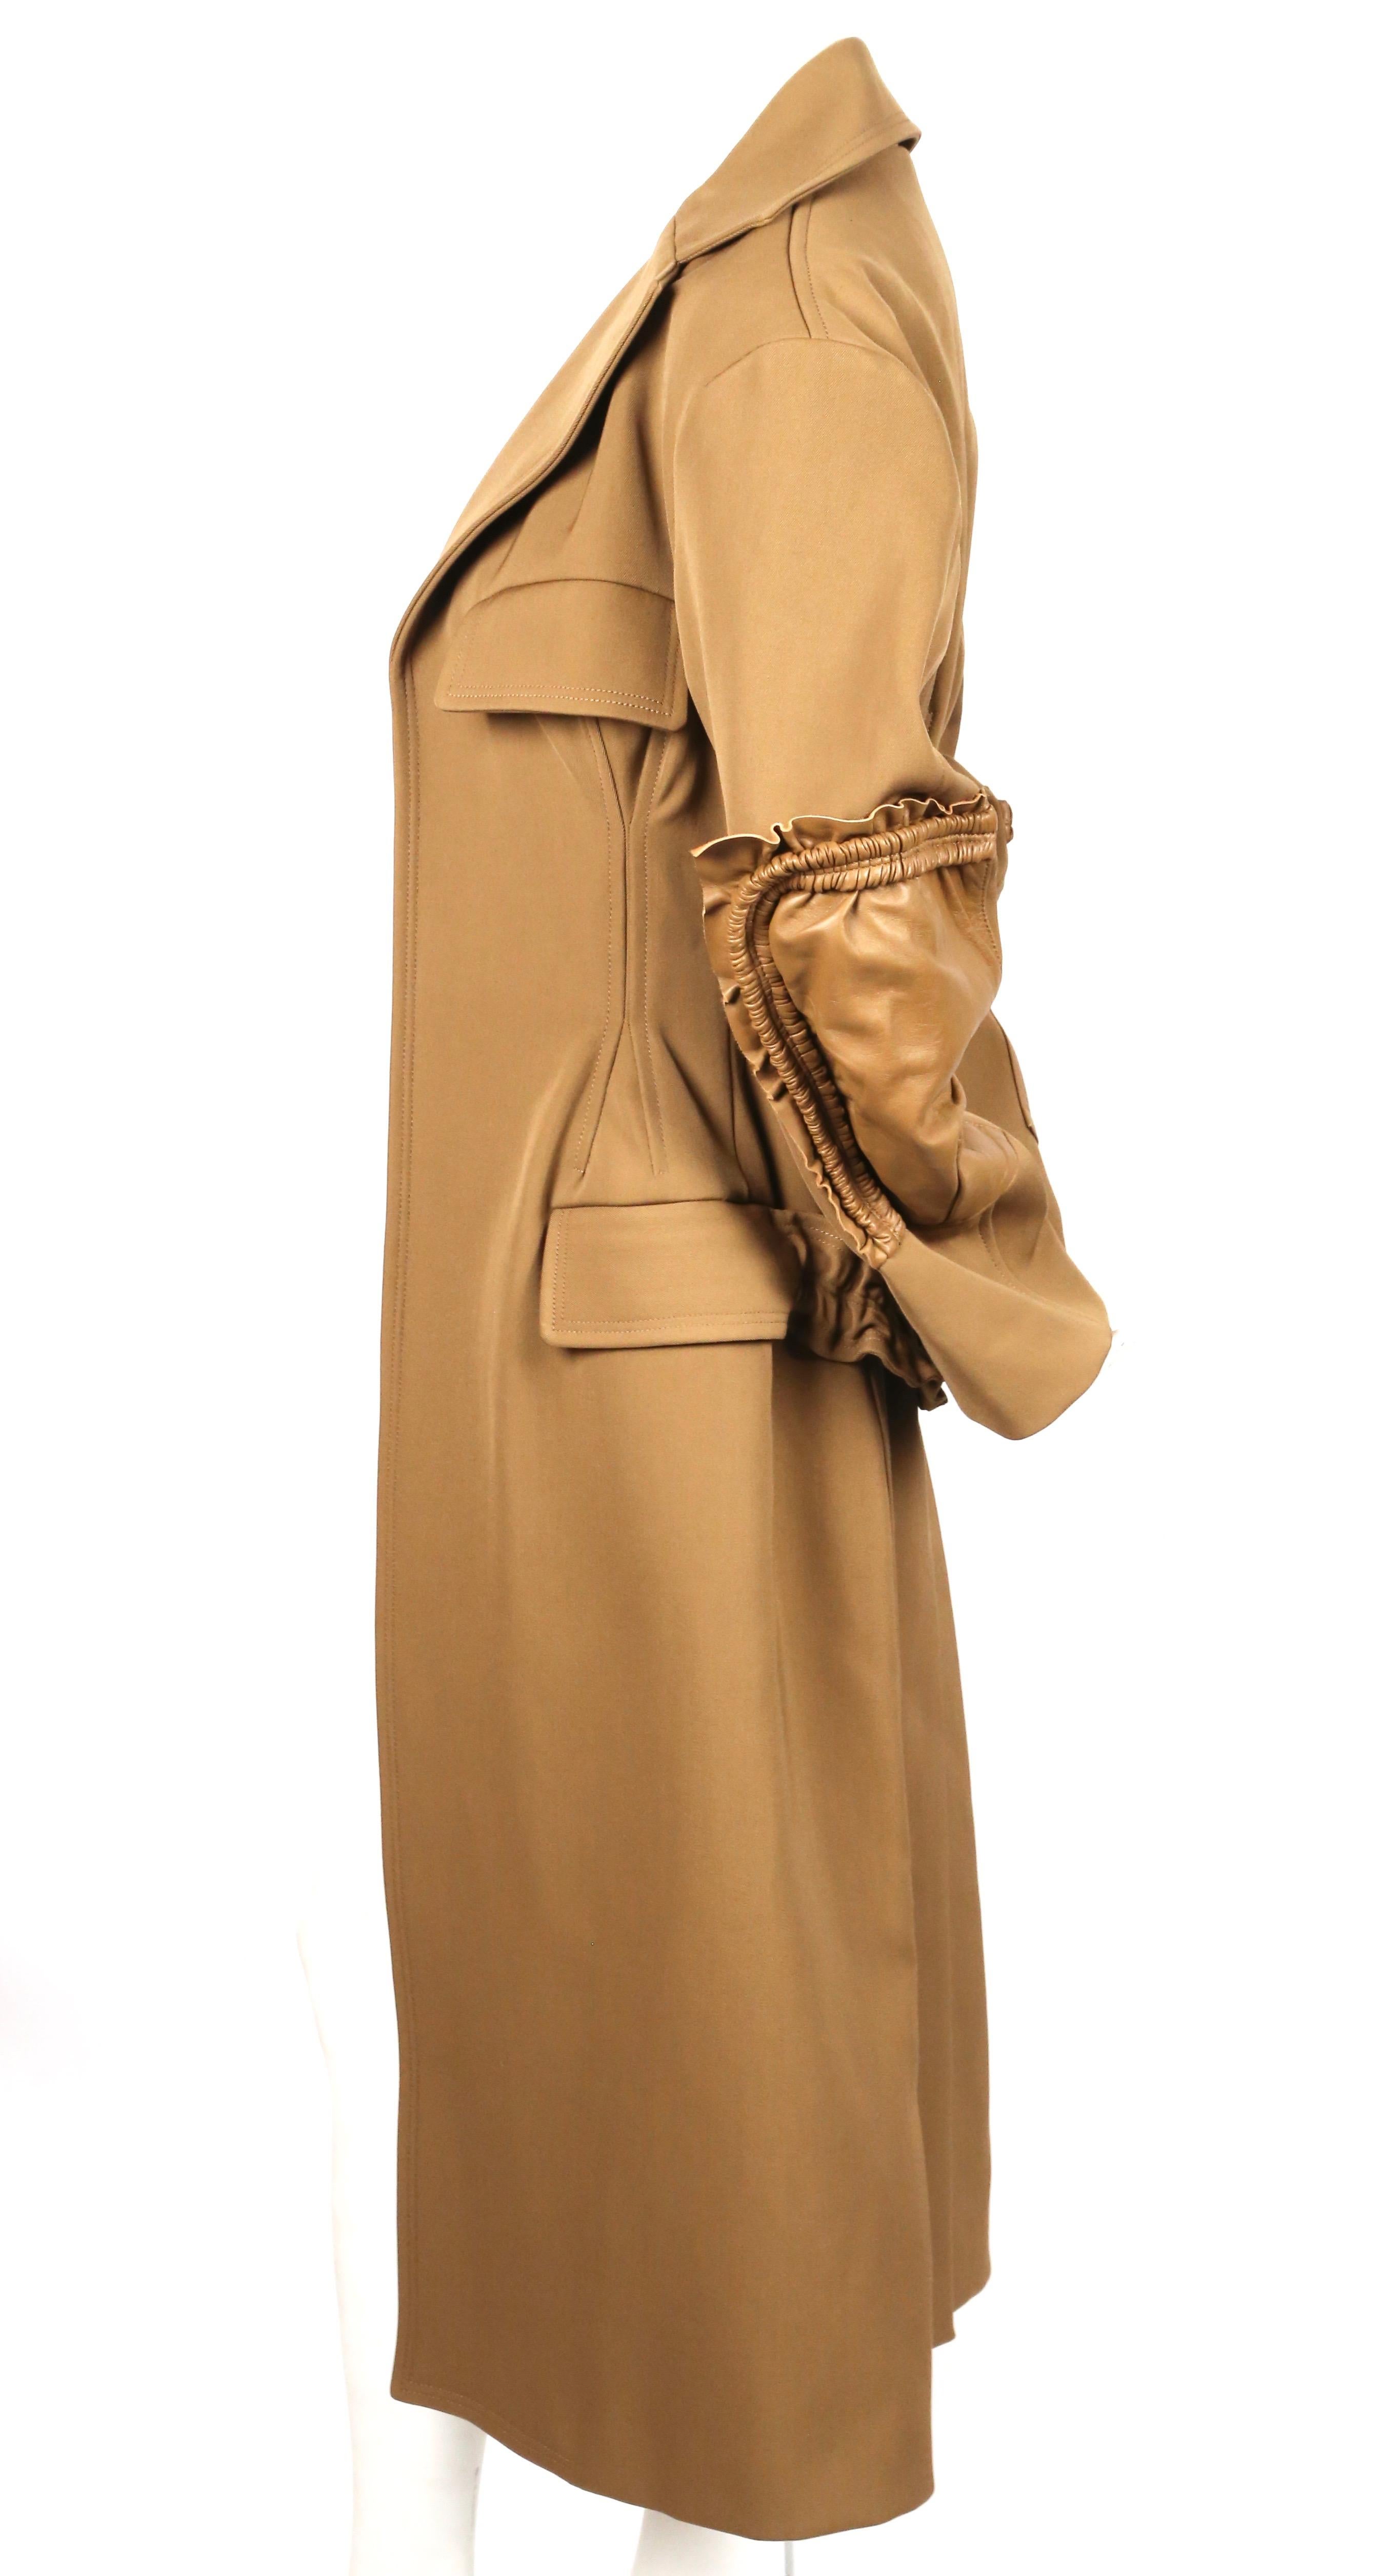 Dark-tan, long, gabardine coat with ruffled leather elbow patches, ruched half-belt and Open closure designed by Phoebe Philo exactly as seen on the spring 2017 runway. French size 34.  Approximate measurements: drop shoulder 18